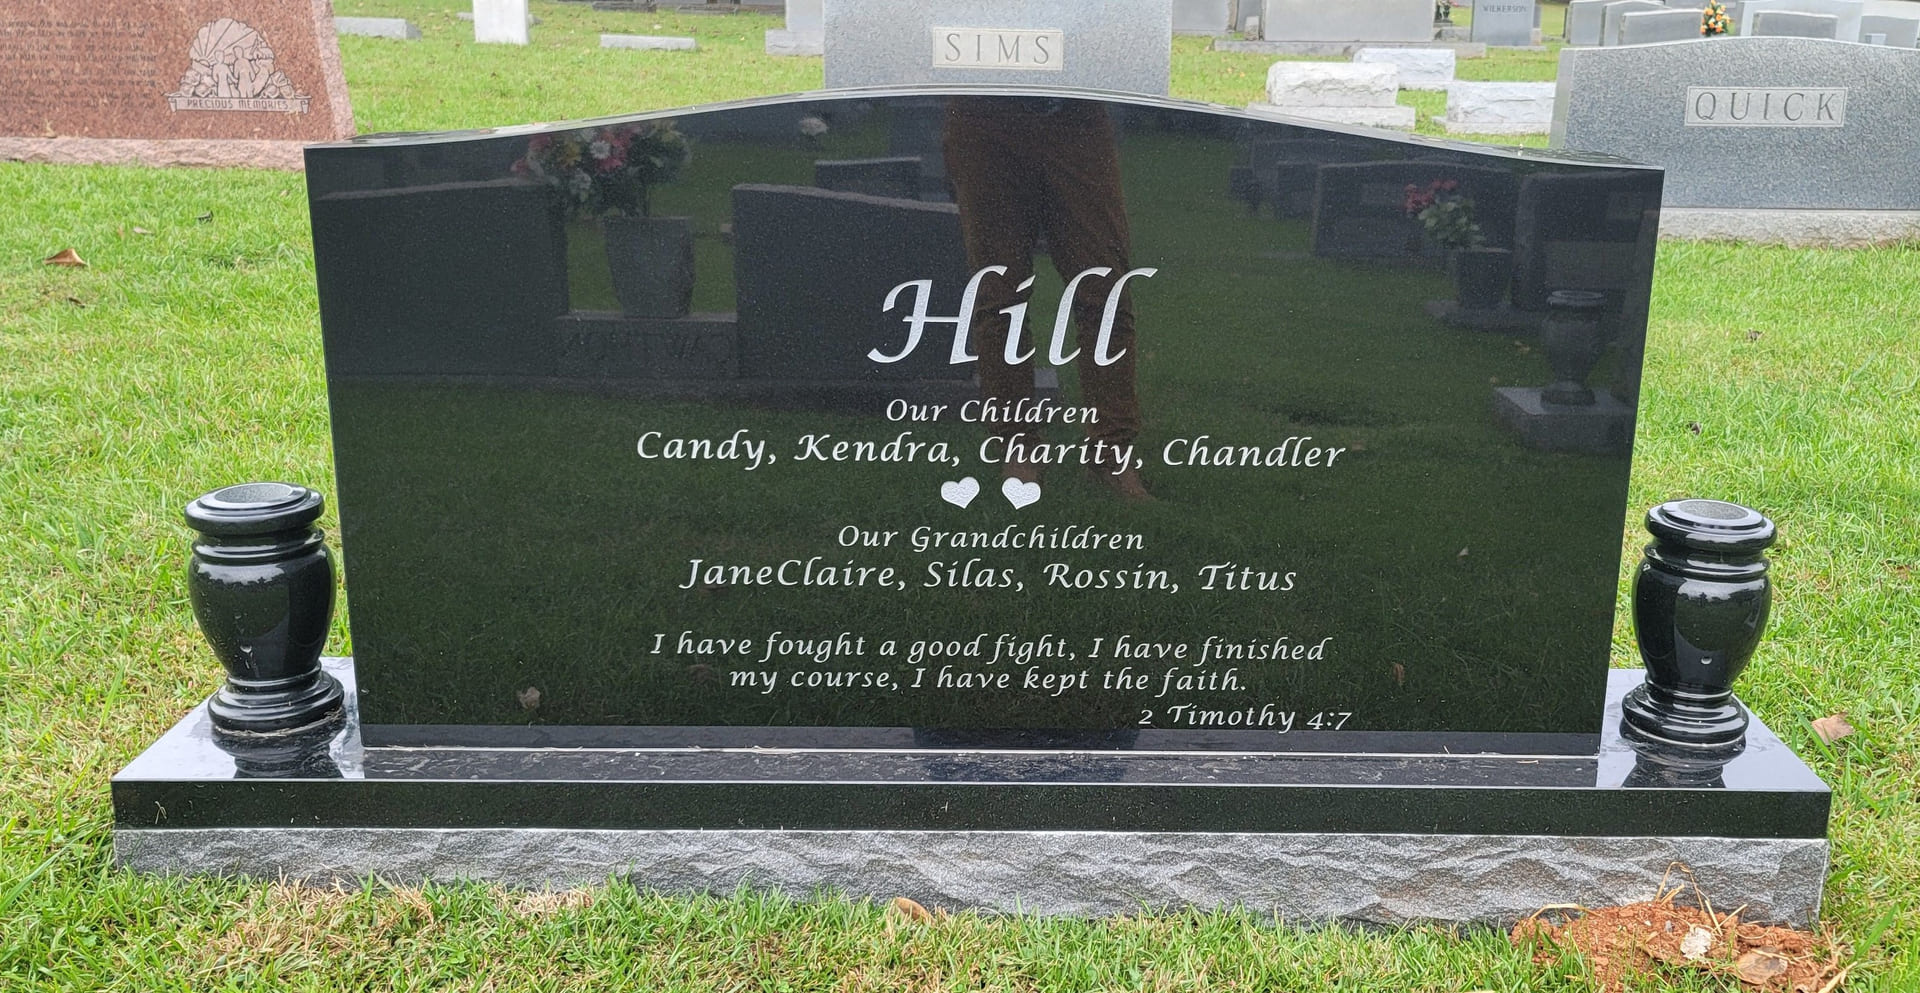 A memorial slab for Candy Kendra Charity, Chandler